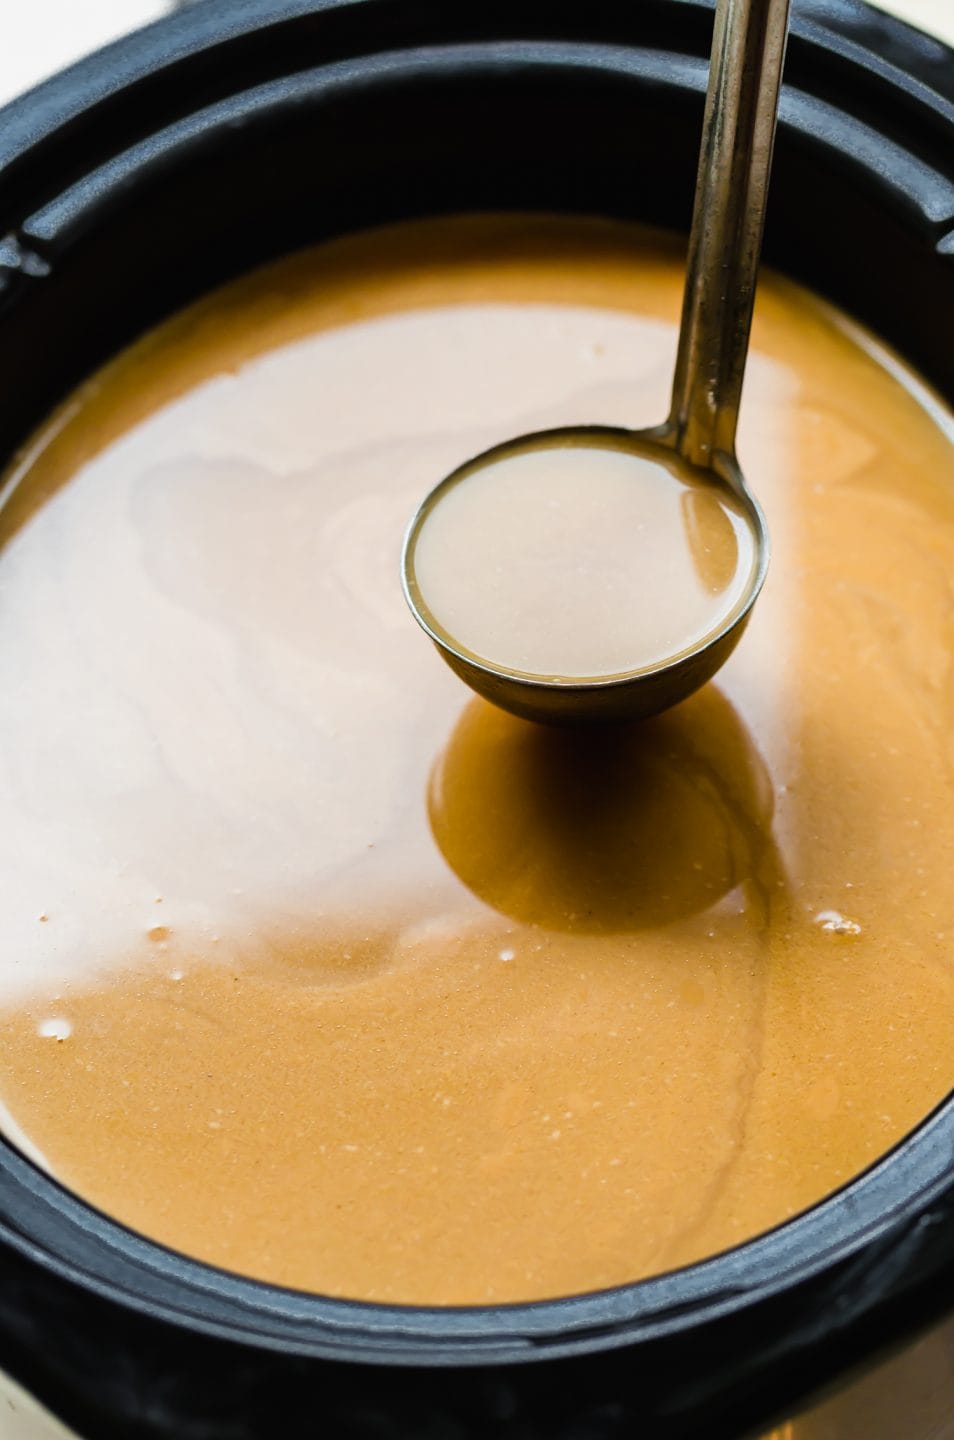 A ladle scooping out salted caramel apple cider from a slow cooker.